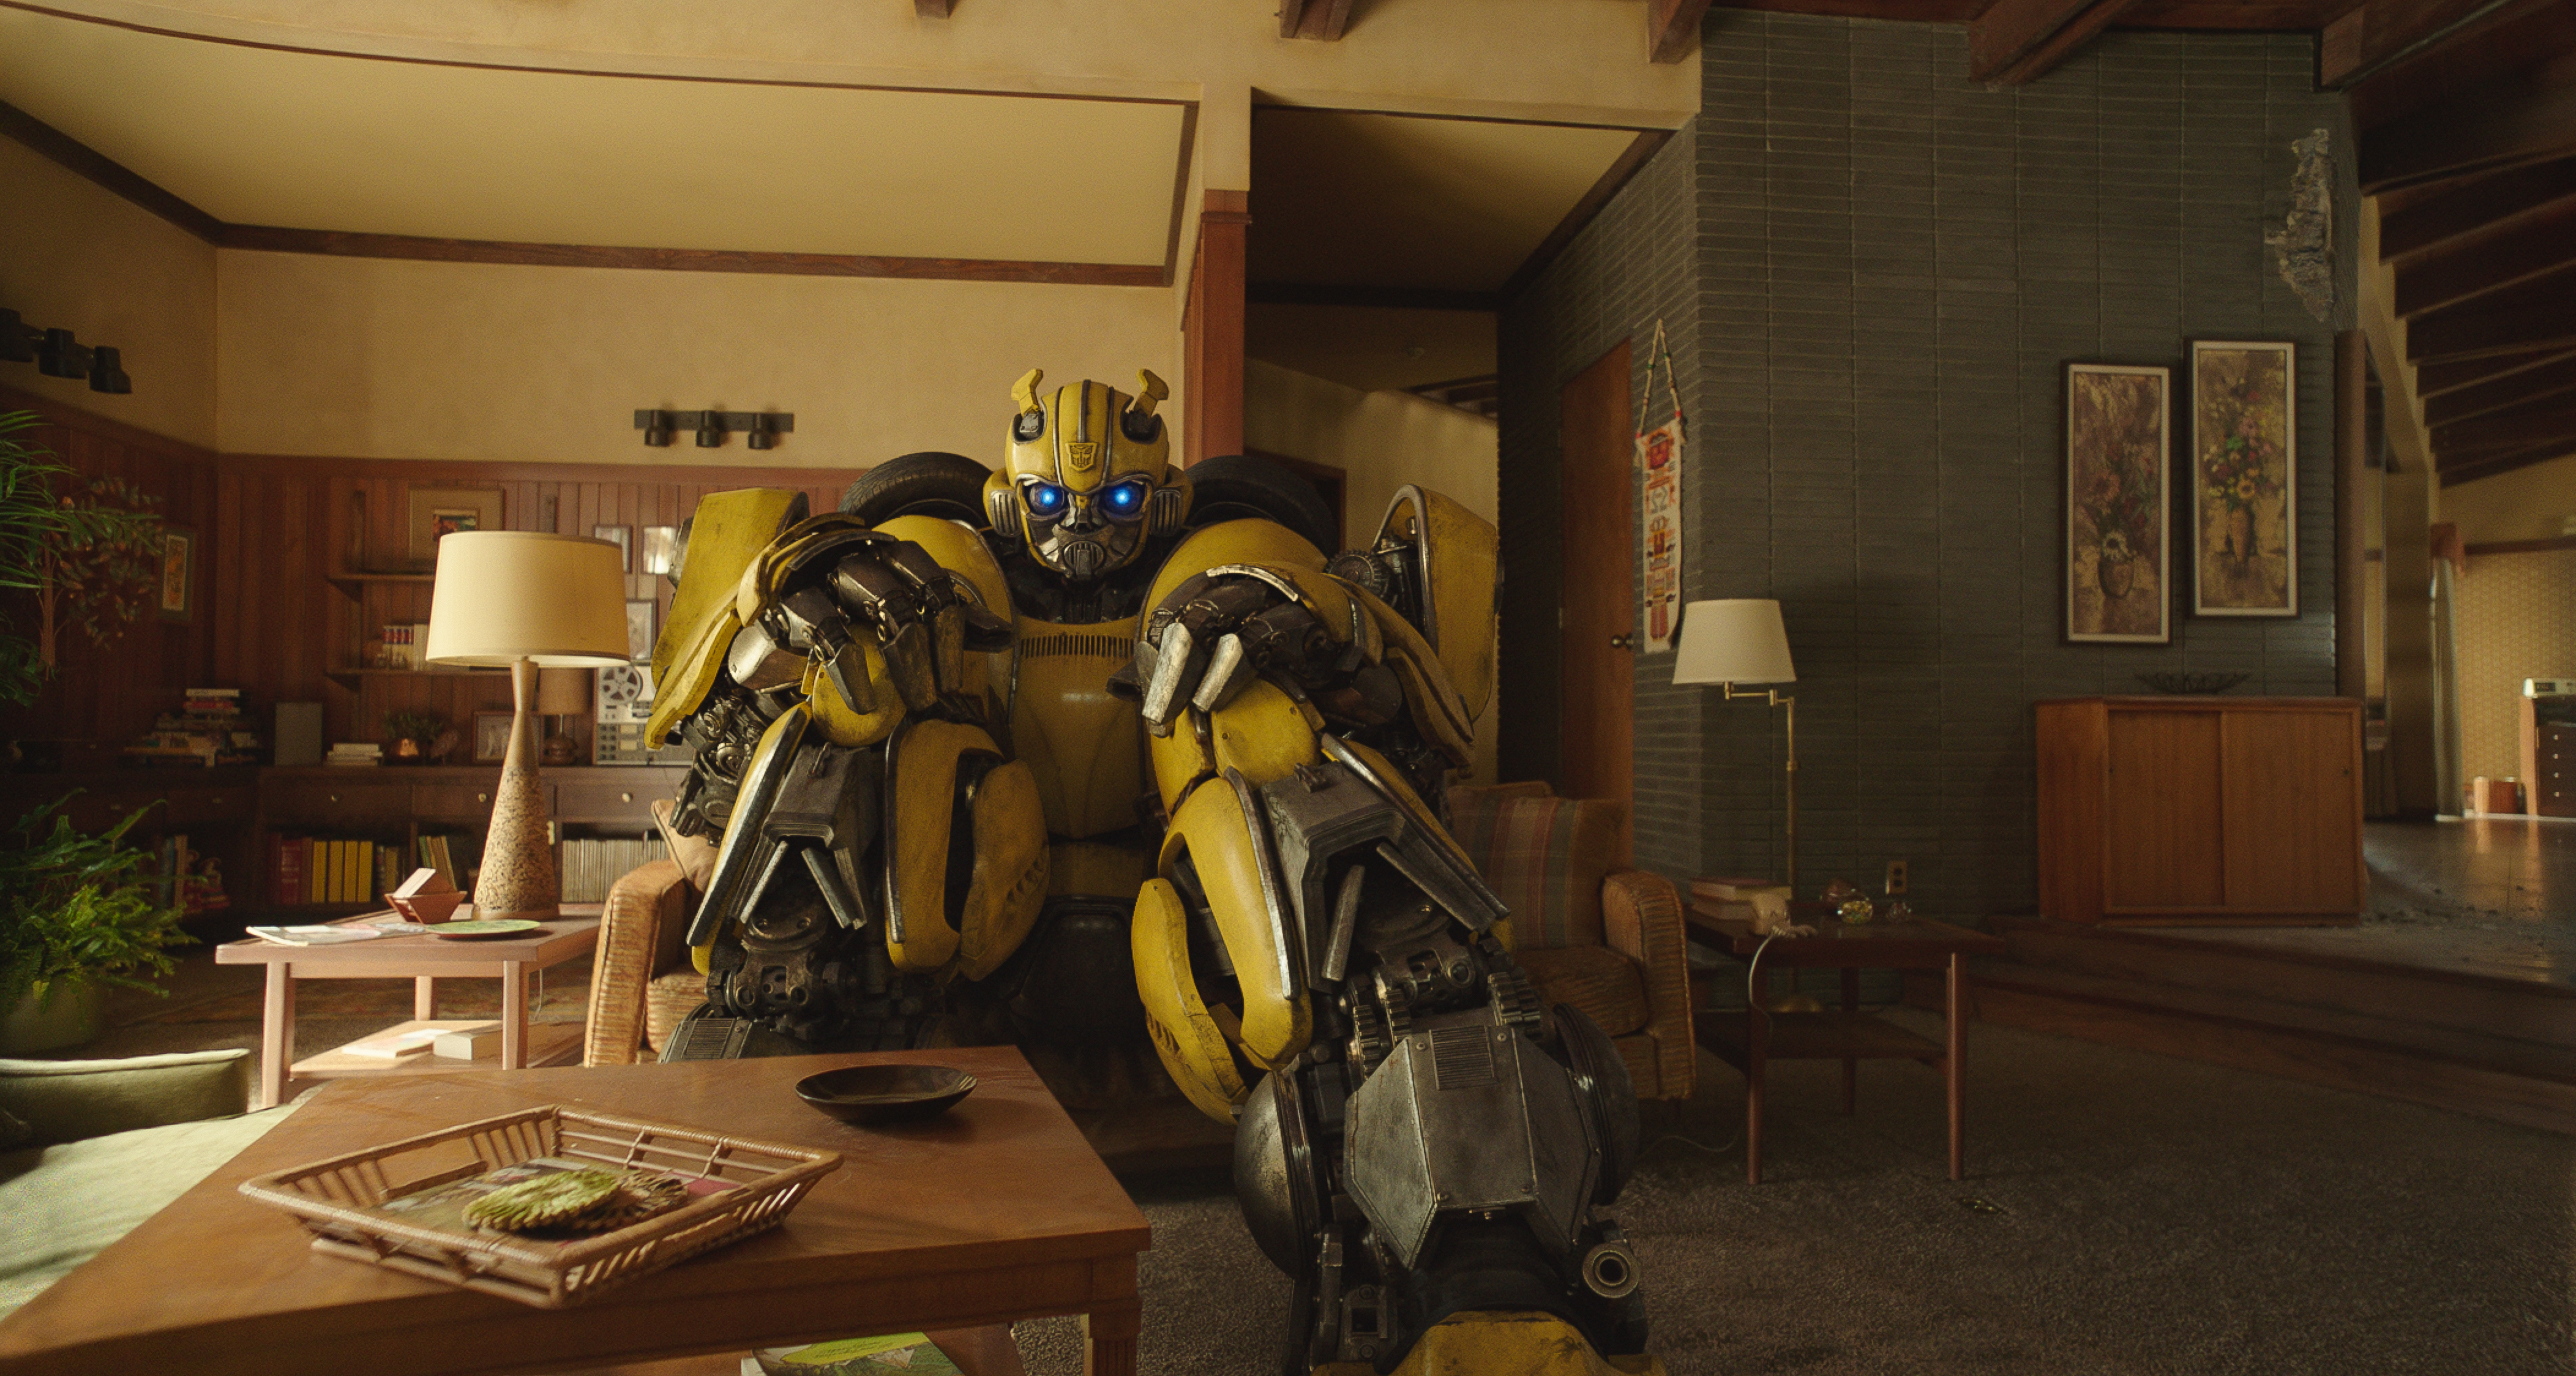 Bumblebee still (Paramount Pictures)